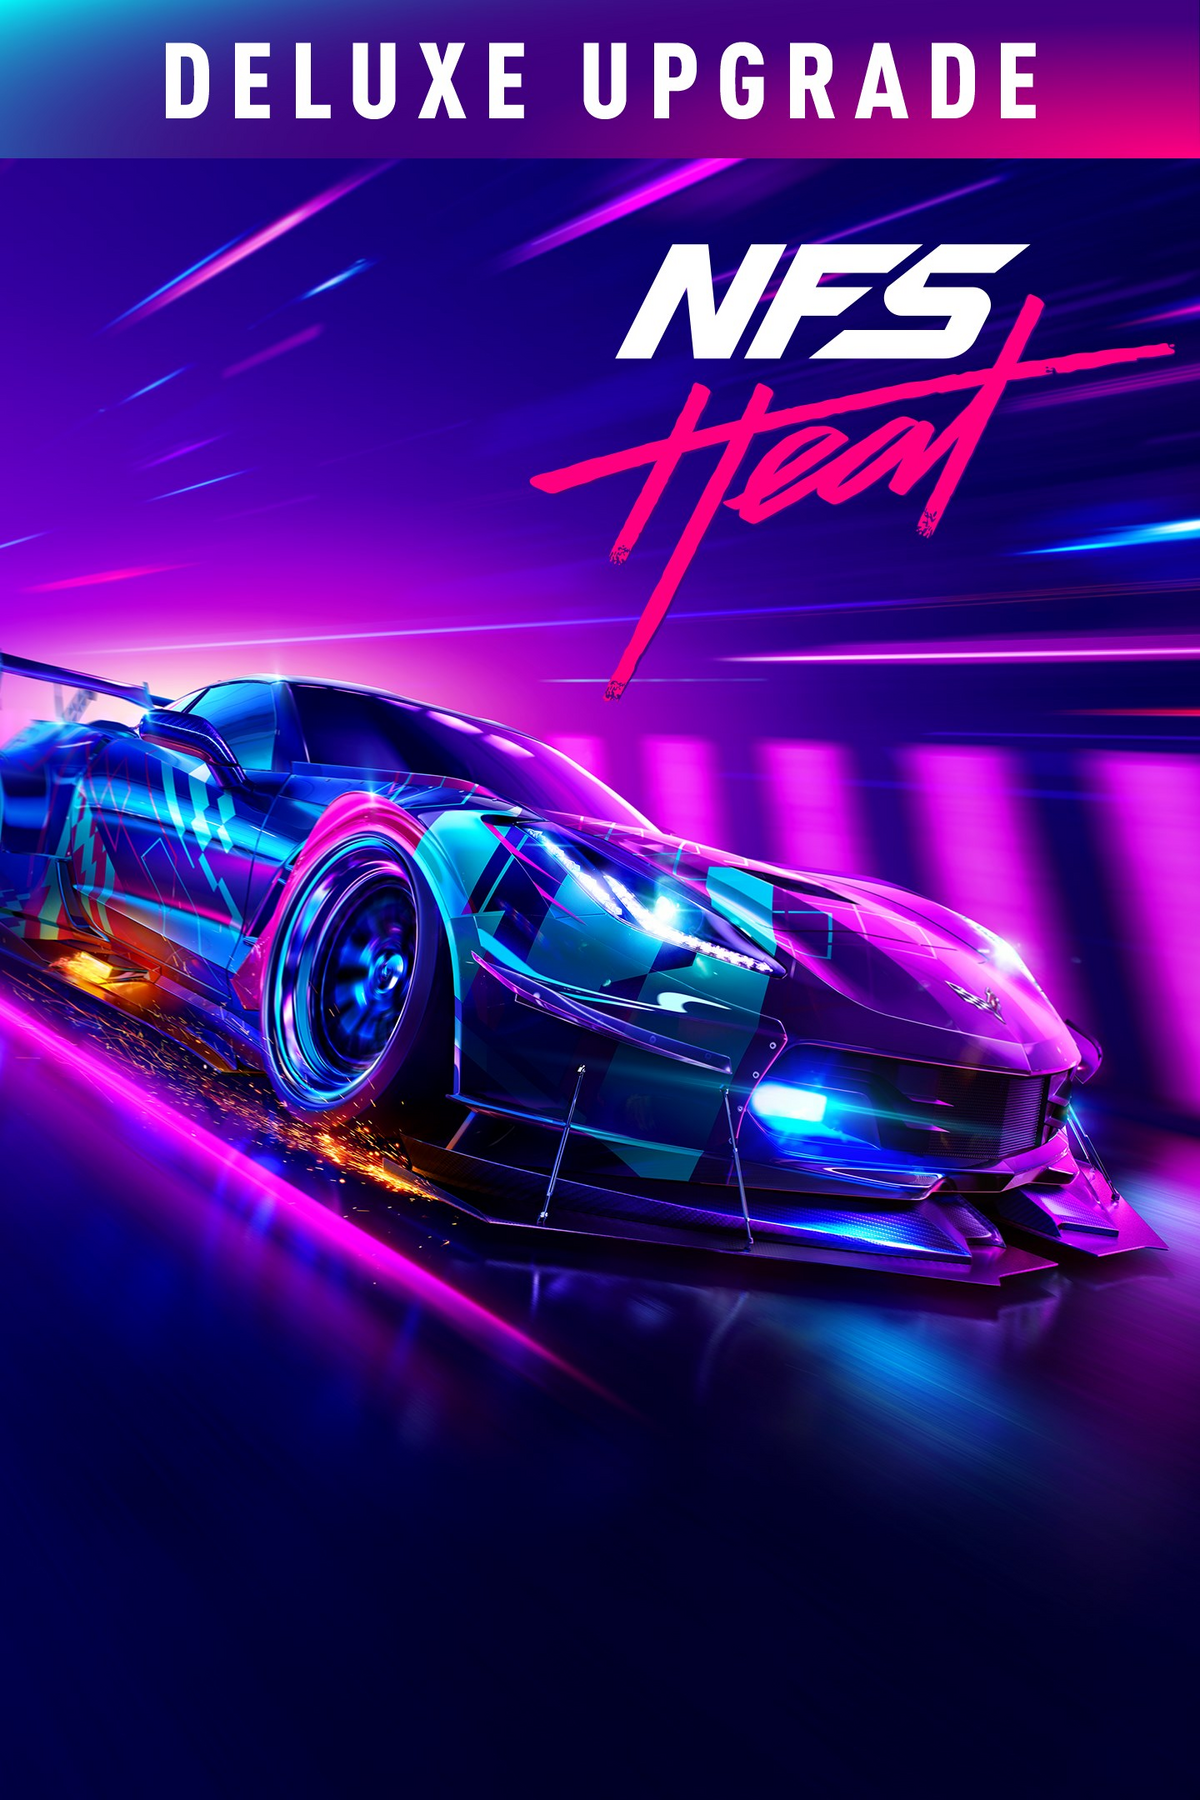 NFS Collection Definitive Edition on Ps5 by melvin764g on DeviantArt